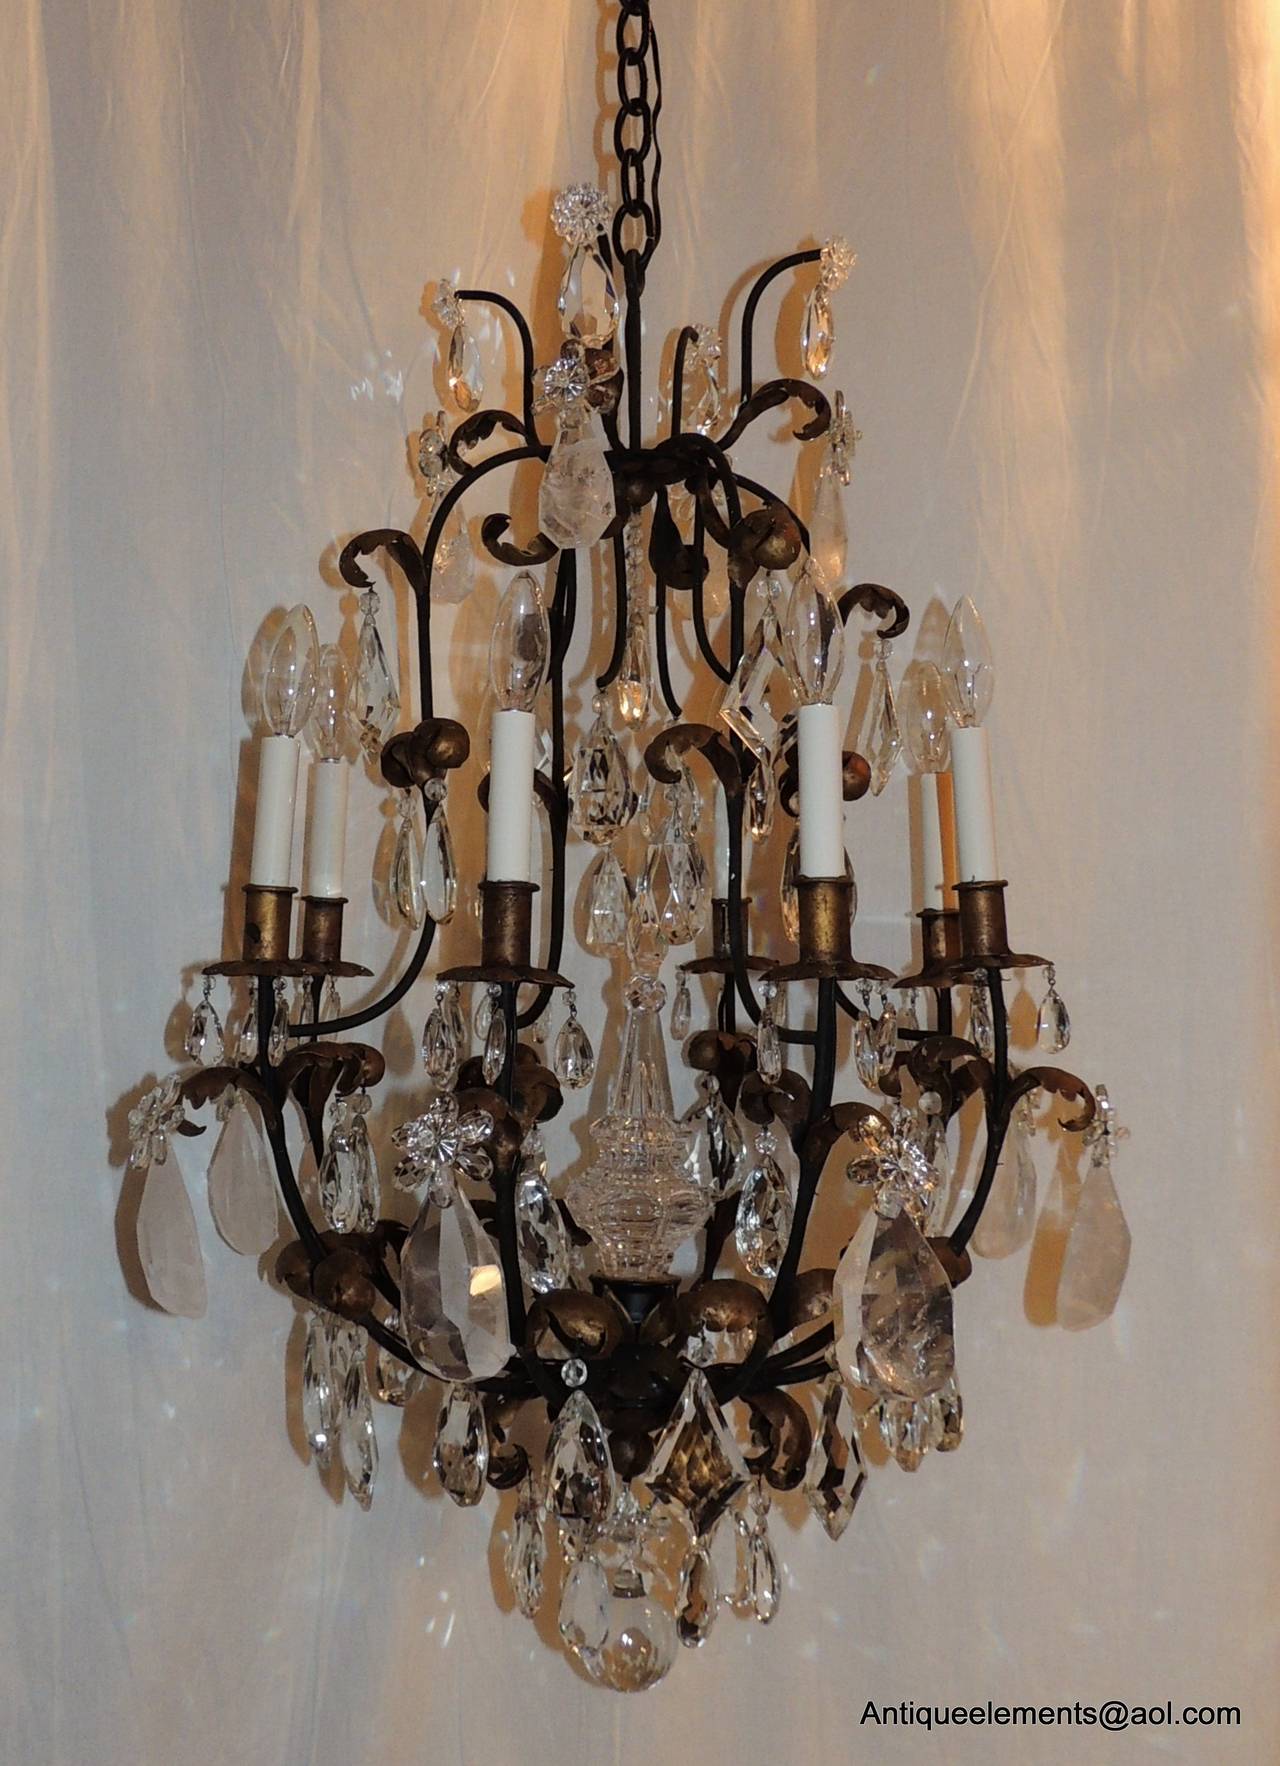 This transitional gilt metal chandelier with eight-lights has wonderful rock crystal prisms, pear shaped and diamond shaped crystal prisms. There is a crystal spire that is in the centre and is topped with a crystal drop from above. Each of the gilt